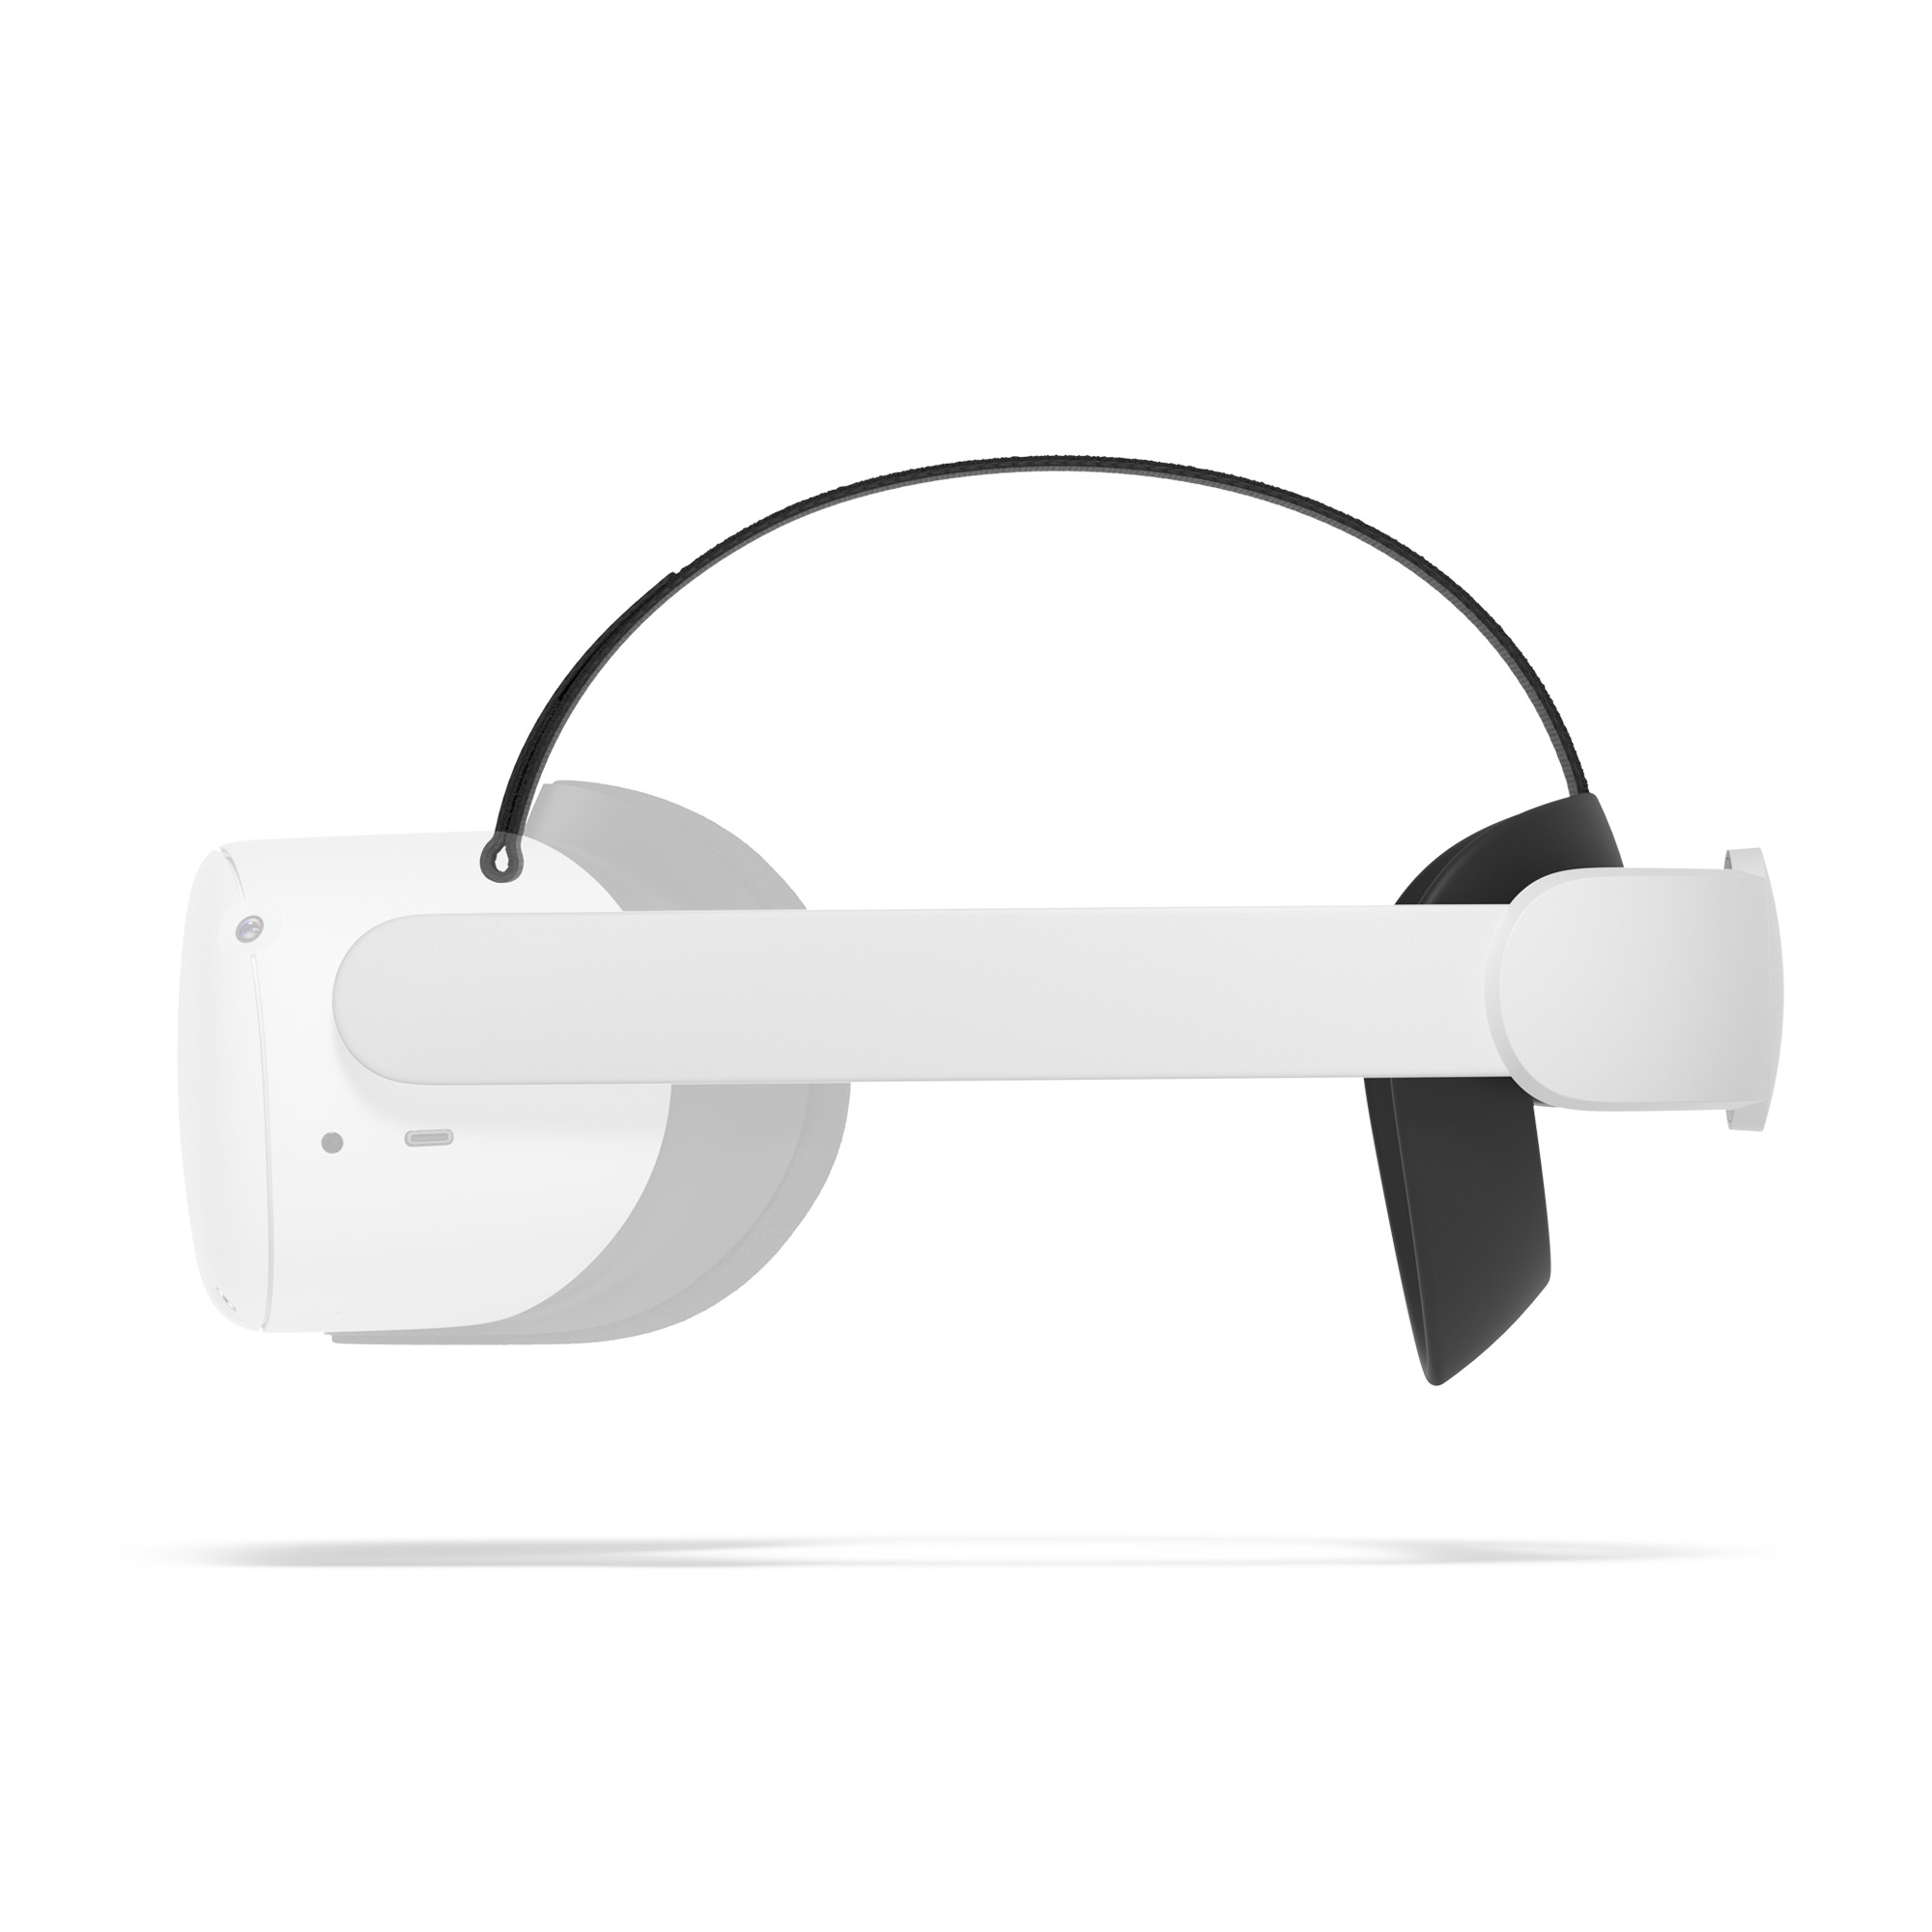 Quest 2 (Oculus) Elite Strap for Enhanced Support and Comfort in VR - image 4 of 7